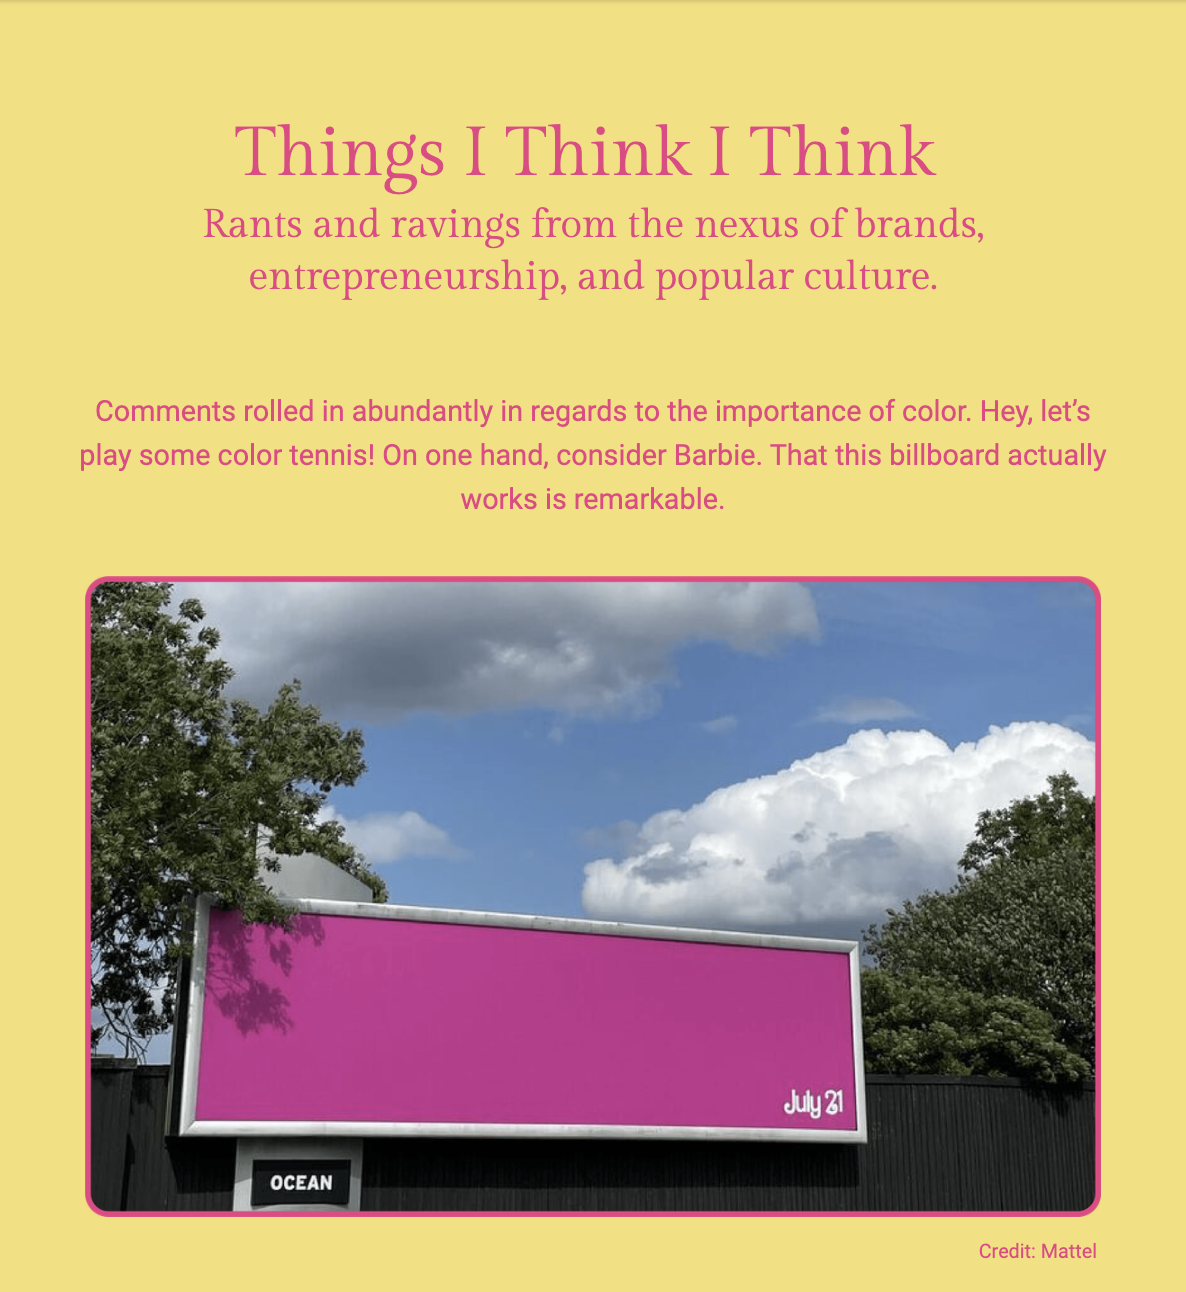 The image contains a header "Things I Think I Think" and a subheading that reads "Rants and ravings from the nexus of brands, entrepreneurship, and popular culture." Below the headings, the text discusses the significance of color in branding, and uses Barbie as an example of effective use of color. The author is impressed by the fact that the Barbie billboard works well.

The bottom part of the image shows a photograph of a simple billboard with a vibrant pink color and the word "OCEAN" at the bottom left corner, and a date "July 31" at the bottom right corner. The stark contrast of the pink billboard against the blue sky with fluffy white clouds and a green tree line illustrates the visual impact mentioned in the text. The image is credited to Mattel.

The text within the image reads:
"Comments rolled in abundantly in regards to the importance of color. Hey, let’s play some color tennis! On one hand, consider Barbie. That this billboard actually works is remarkable.

Credit: Mattel"